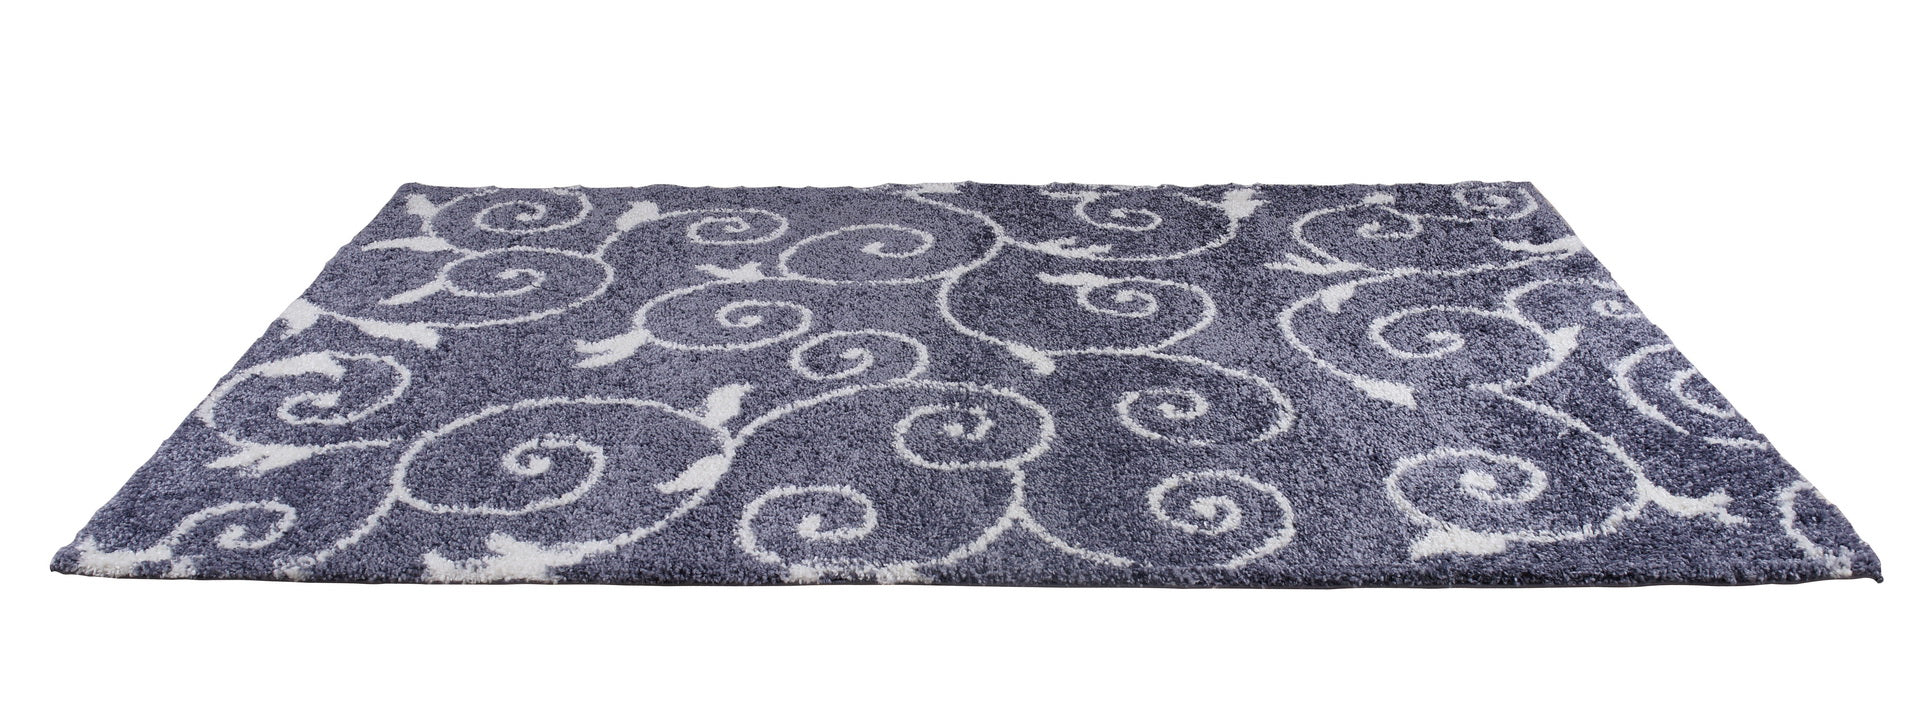 ladole rugs shaggy rabat abstract pattern sustainable spirals style indoor small mat doormat rug in dark gray white 110 x 211 57cm x 90cm 6x8, 6x9 ft Living Room, Bedroom, Dining Area, Kitchen Carpet